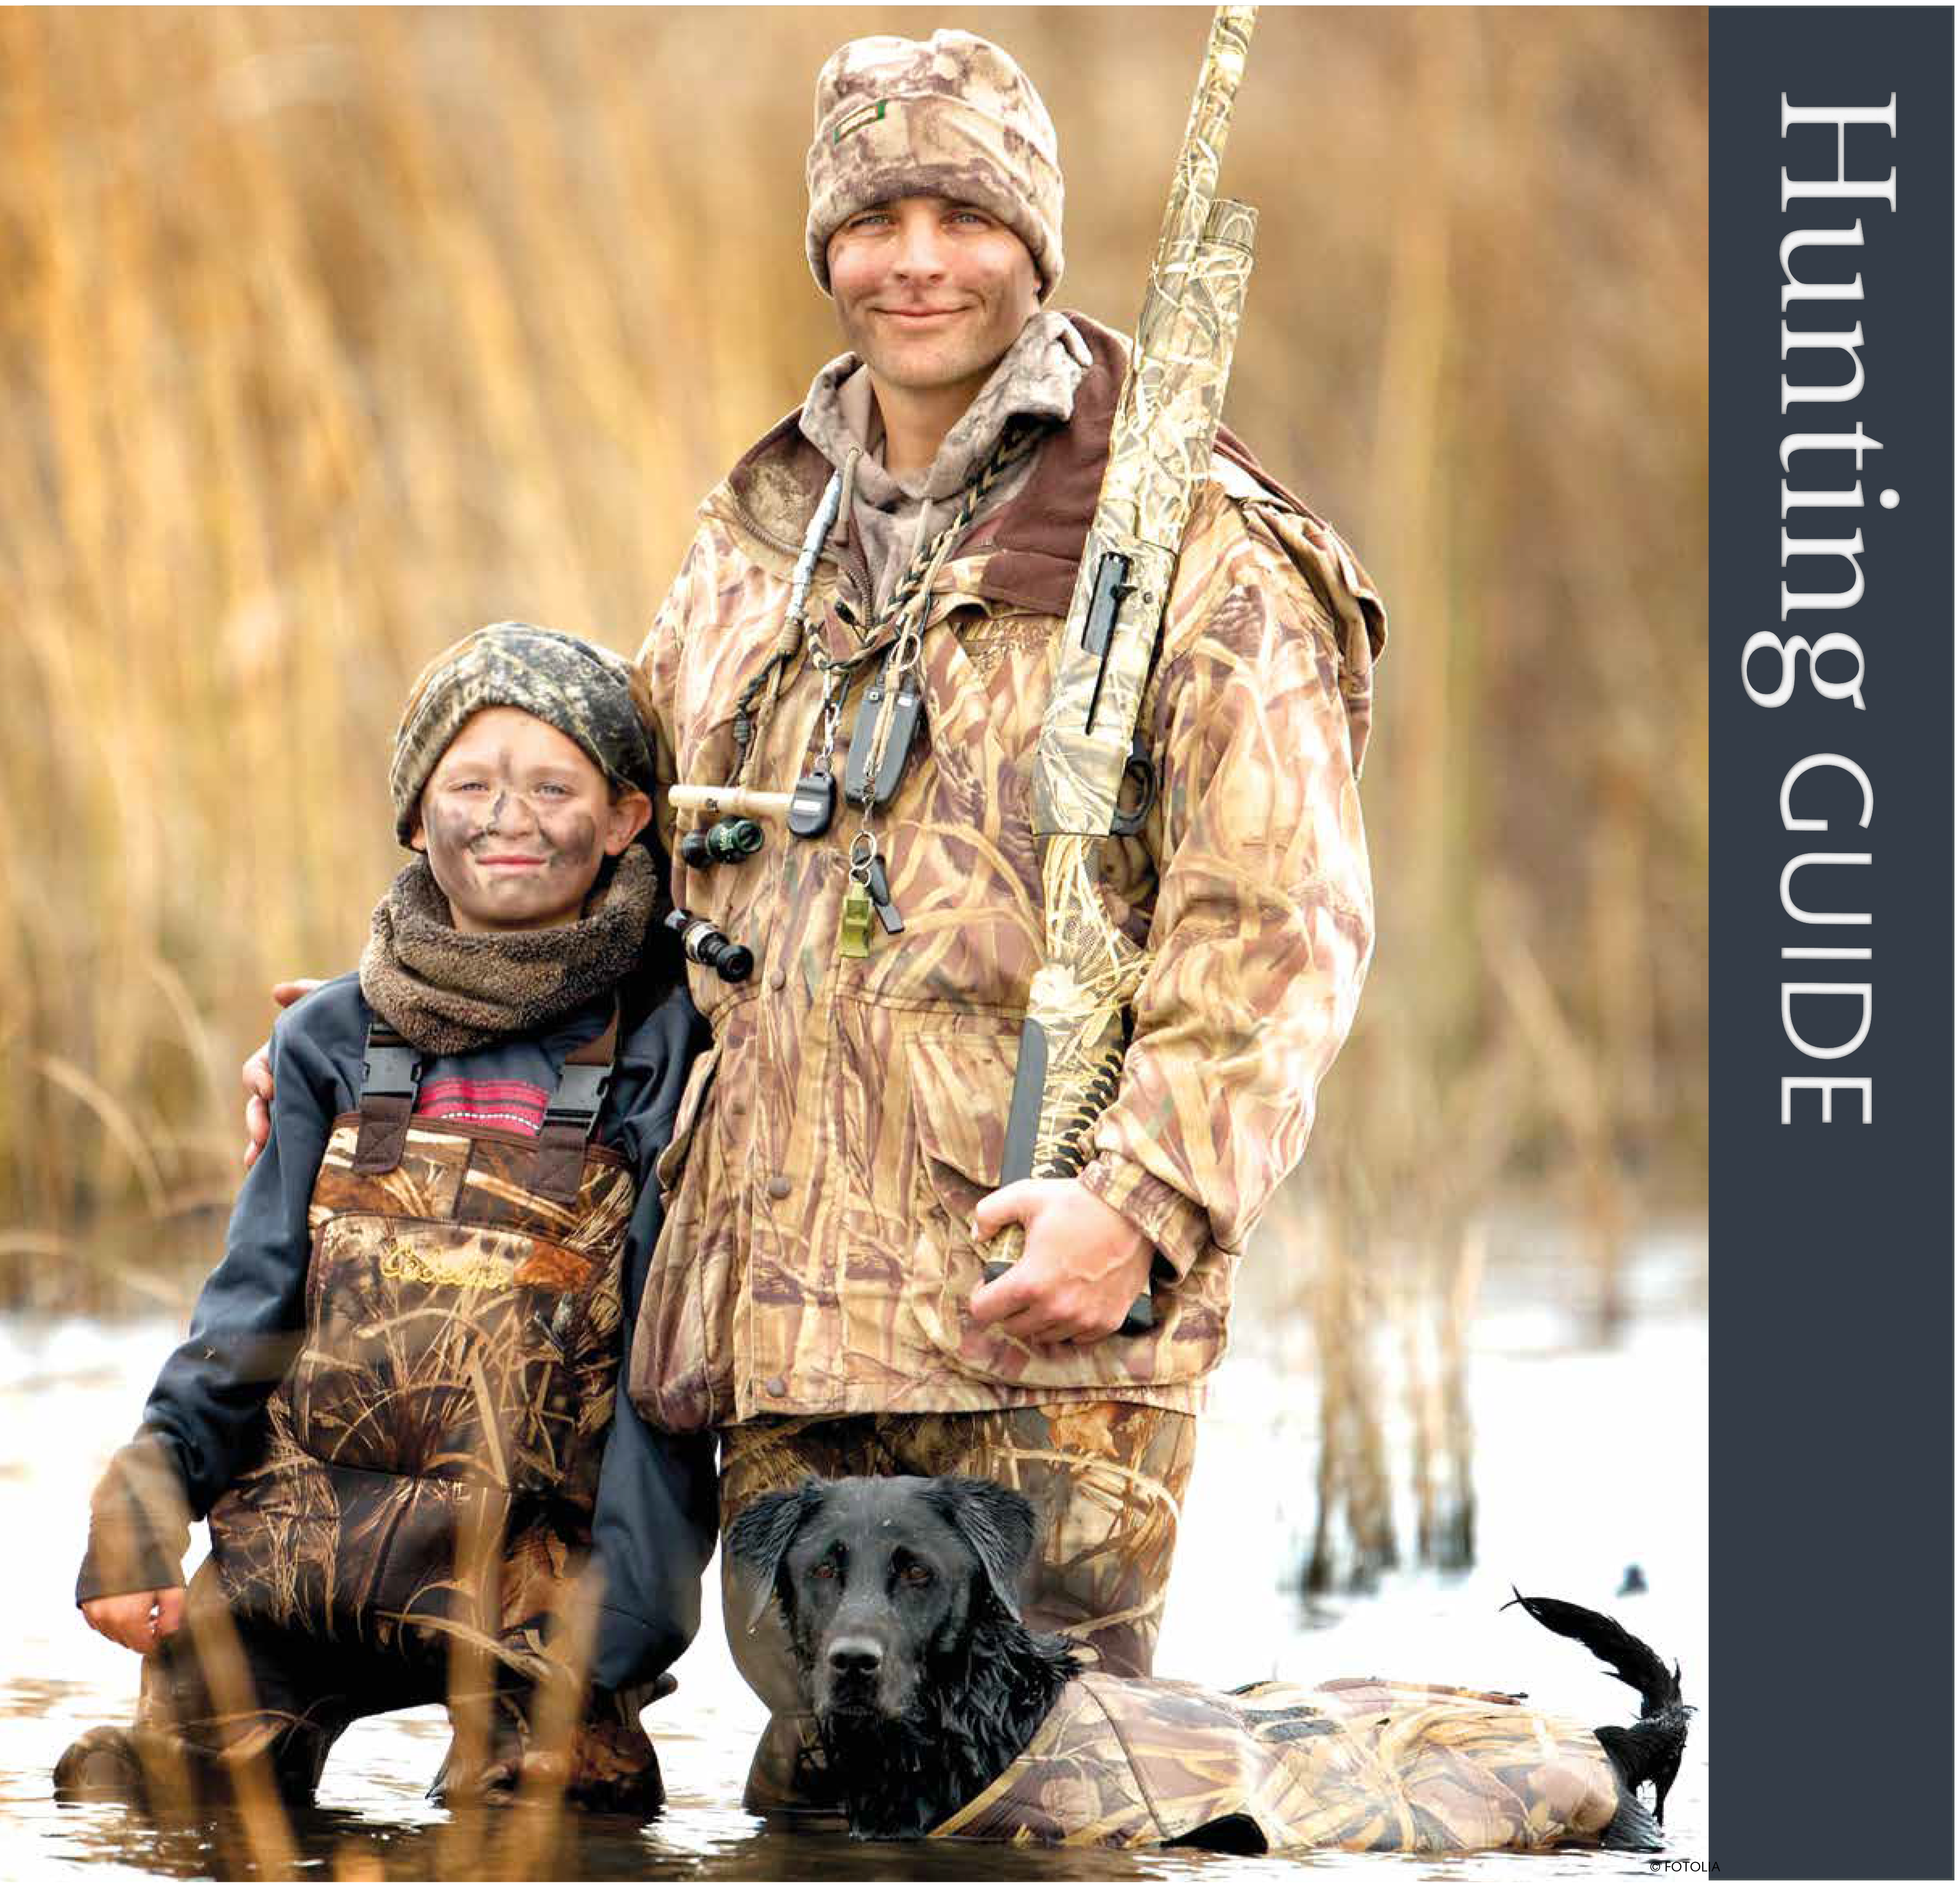 on average, each hunter spends $1,896 per year on hunting — expenditures wh...